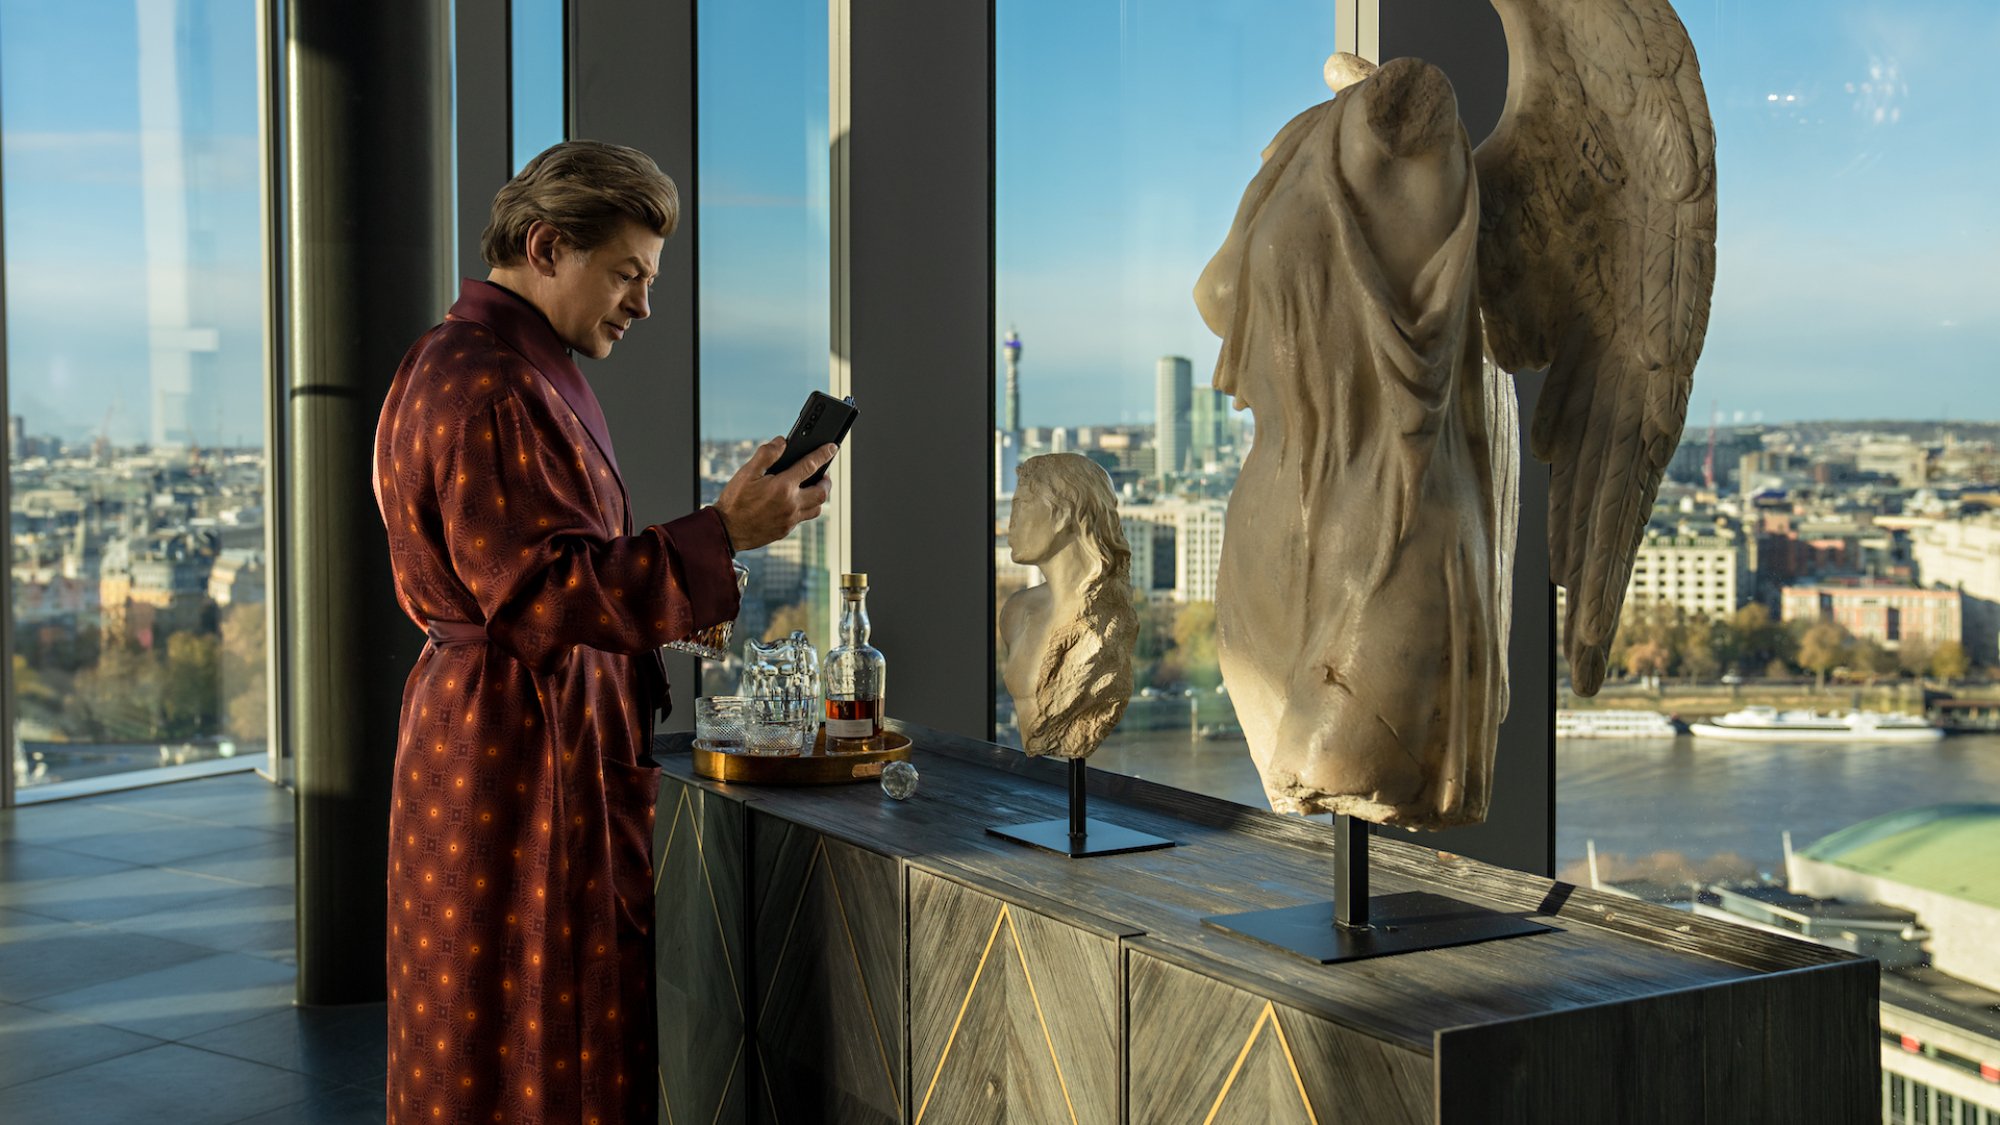 A wealthy man in a robe uses a foldable phone in an all glass apartment standing near a marble bust.